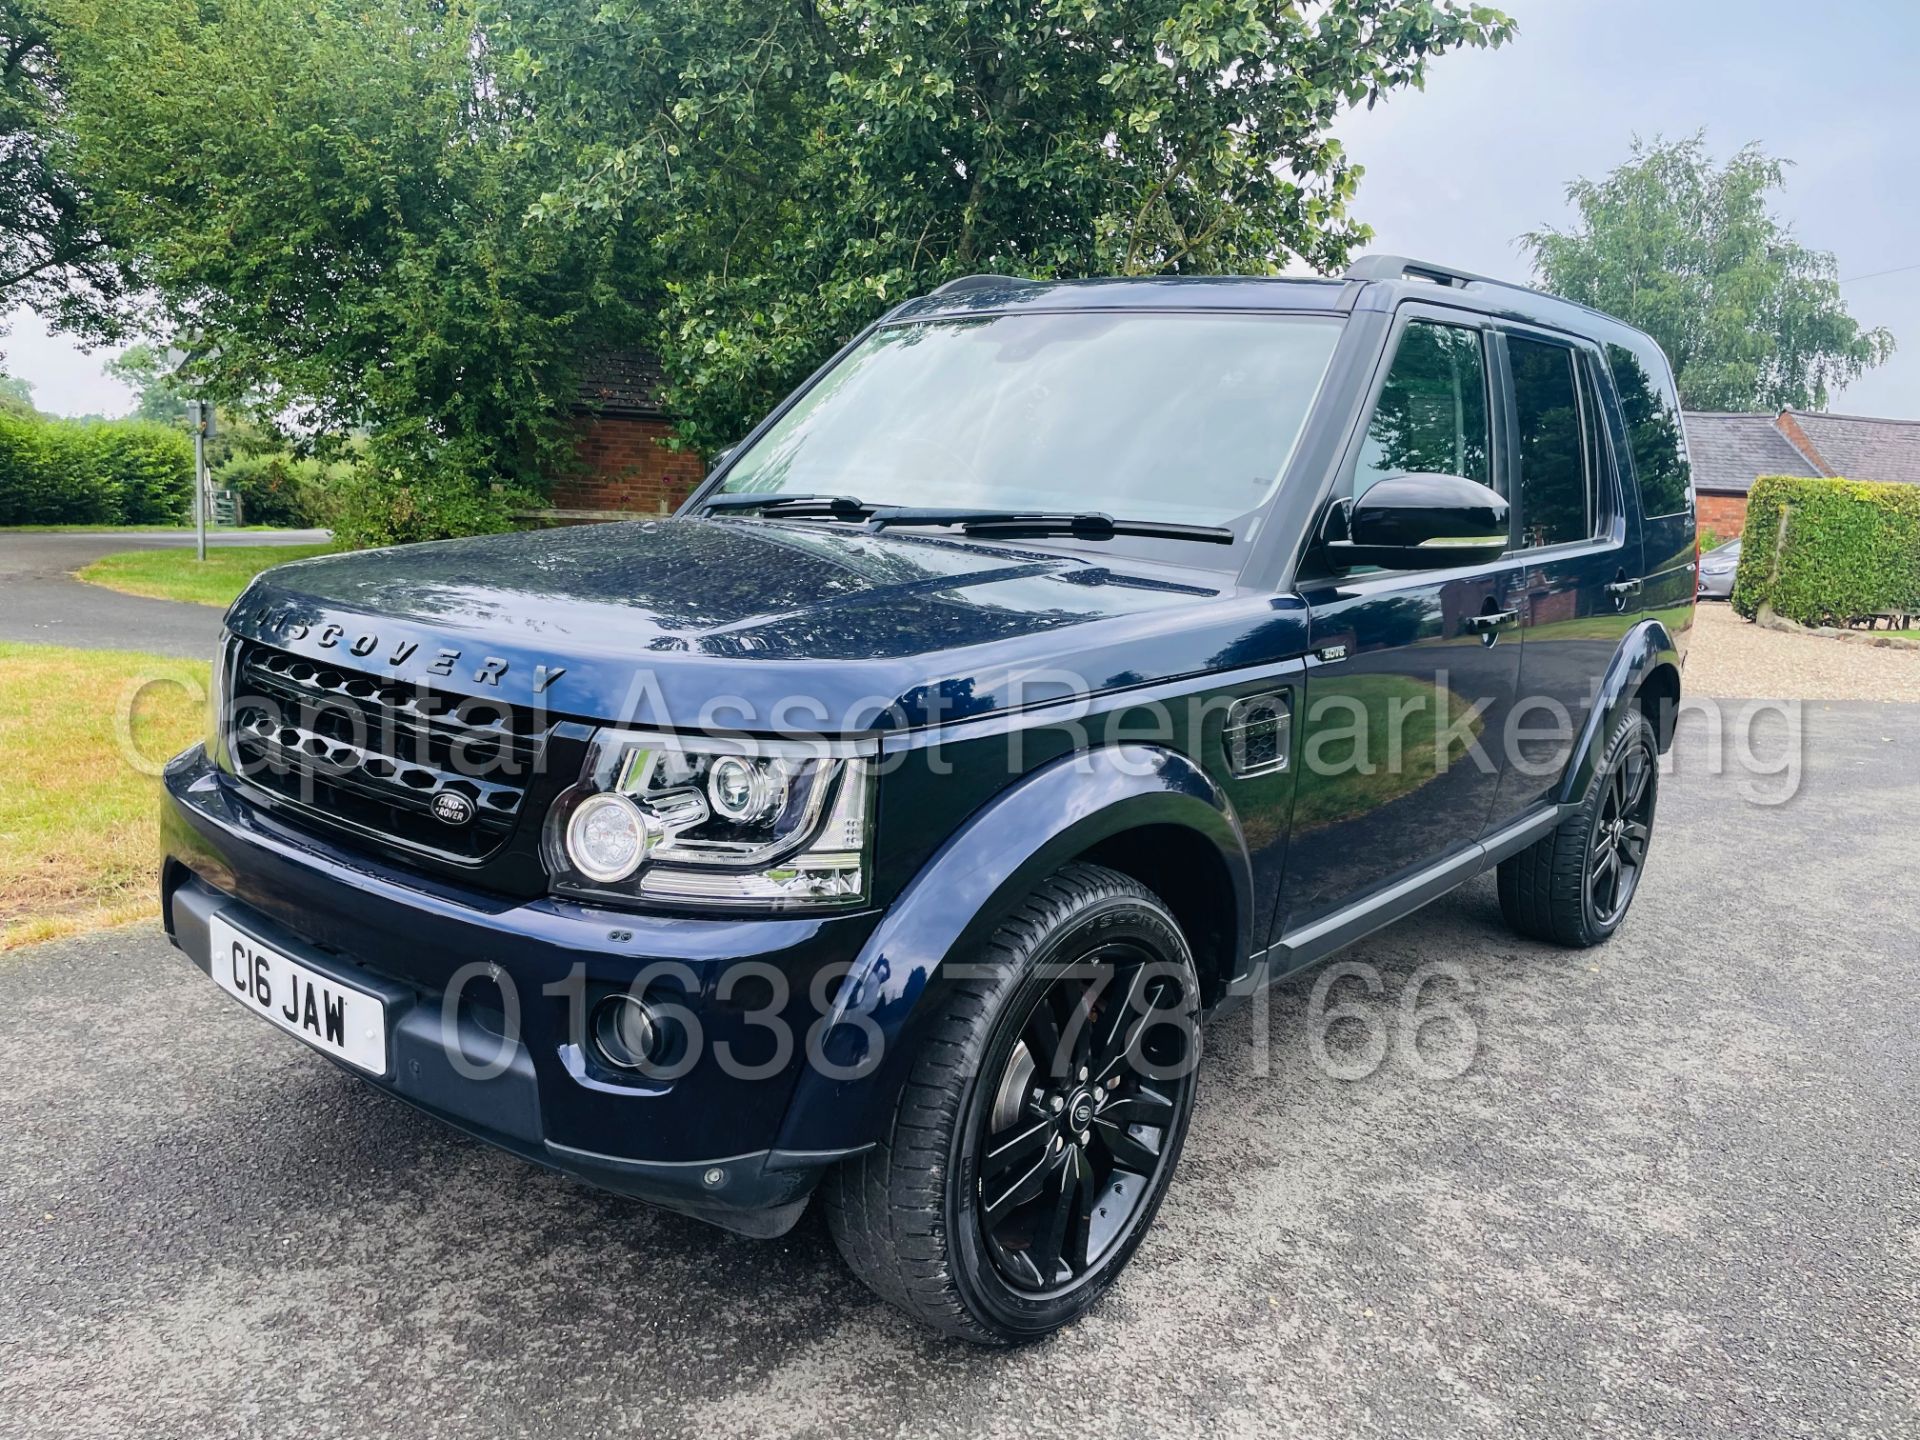 LAND ROVER DISCOVERY 4 *HSE* 7 SEATER SUV (2014 - NEW MODEL) '3.0 SDV6 - 255 BHP - 8 SPEED AUTO' - Image 5 of 61